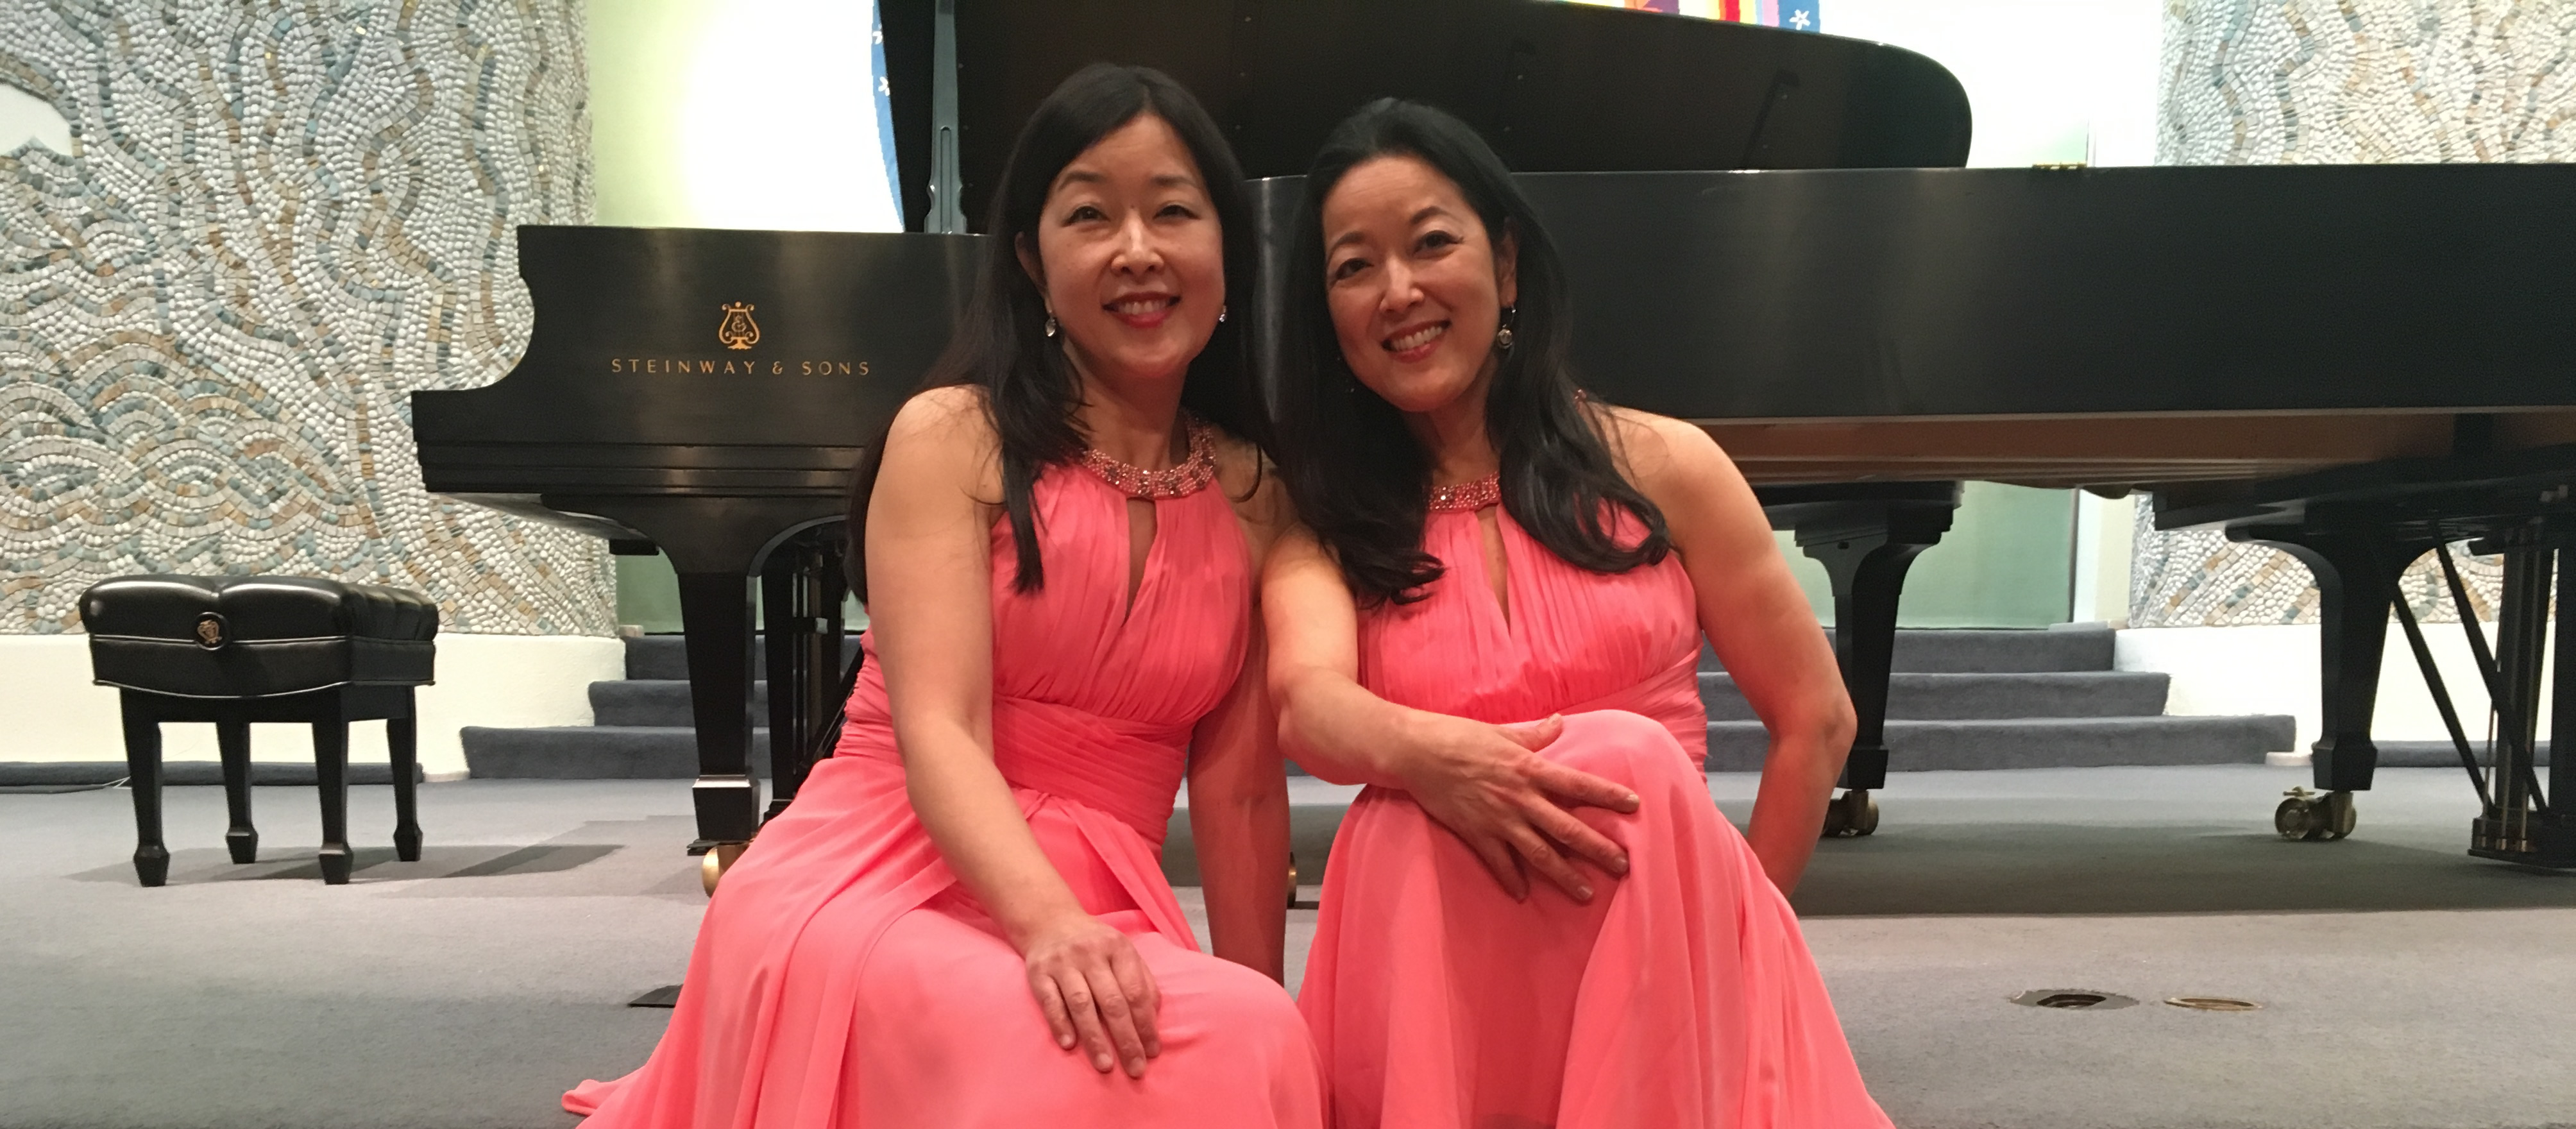 The Mack Sisters duo pianist